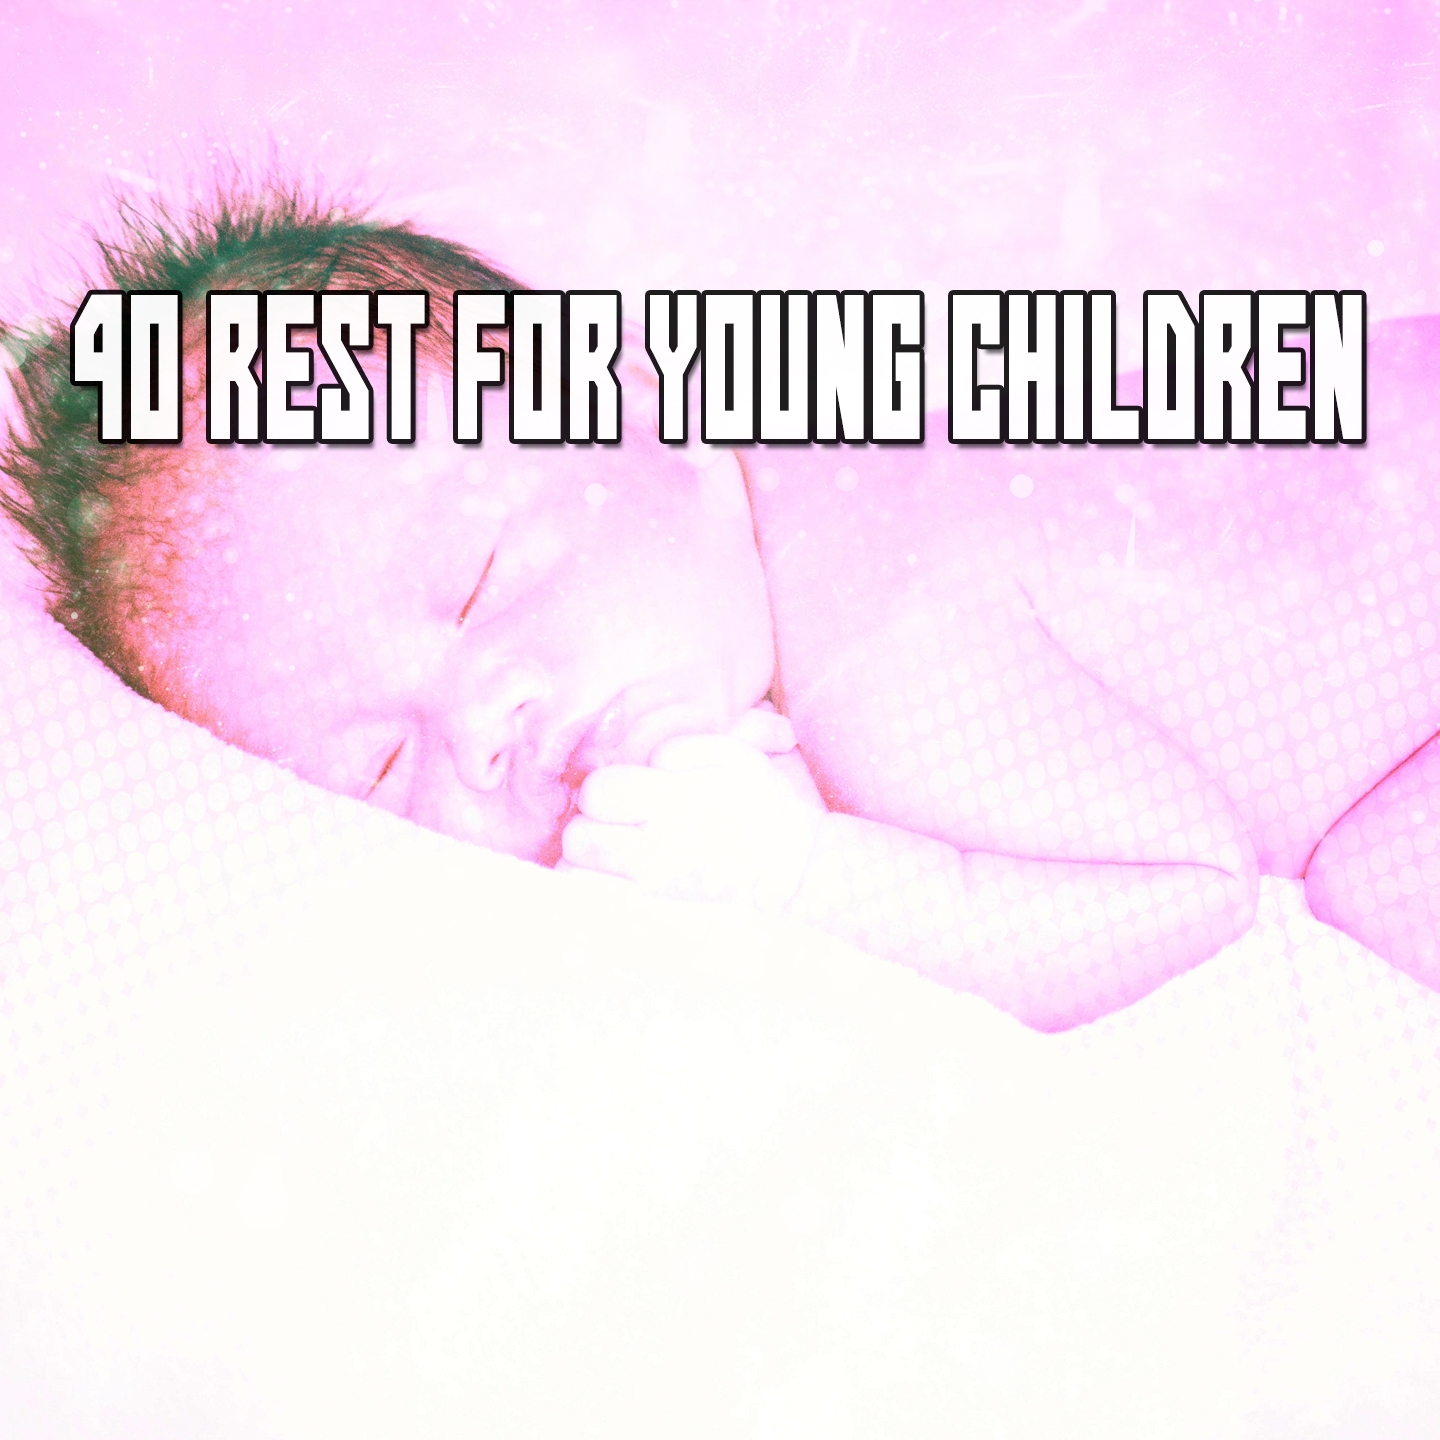 40 Rest For Young Children